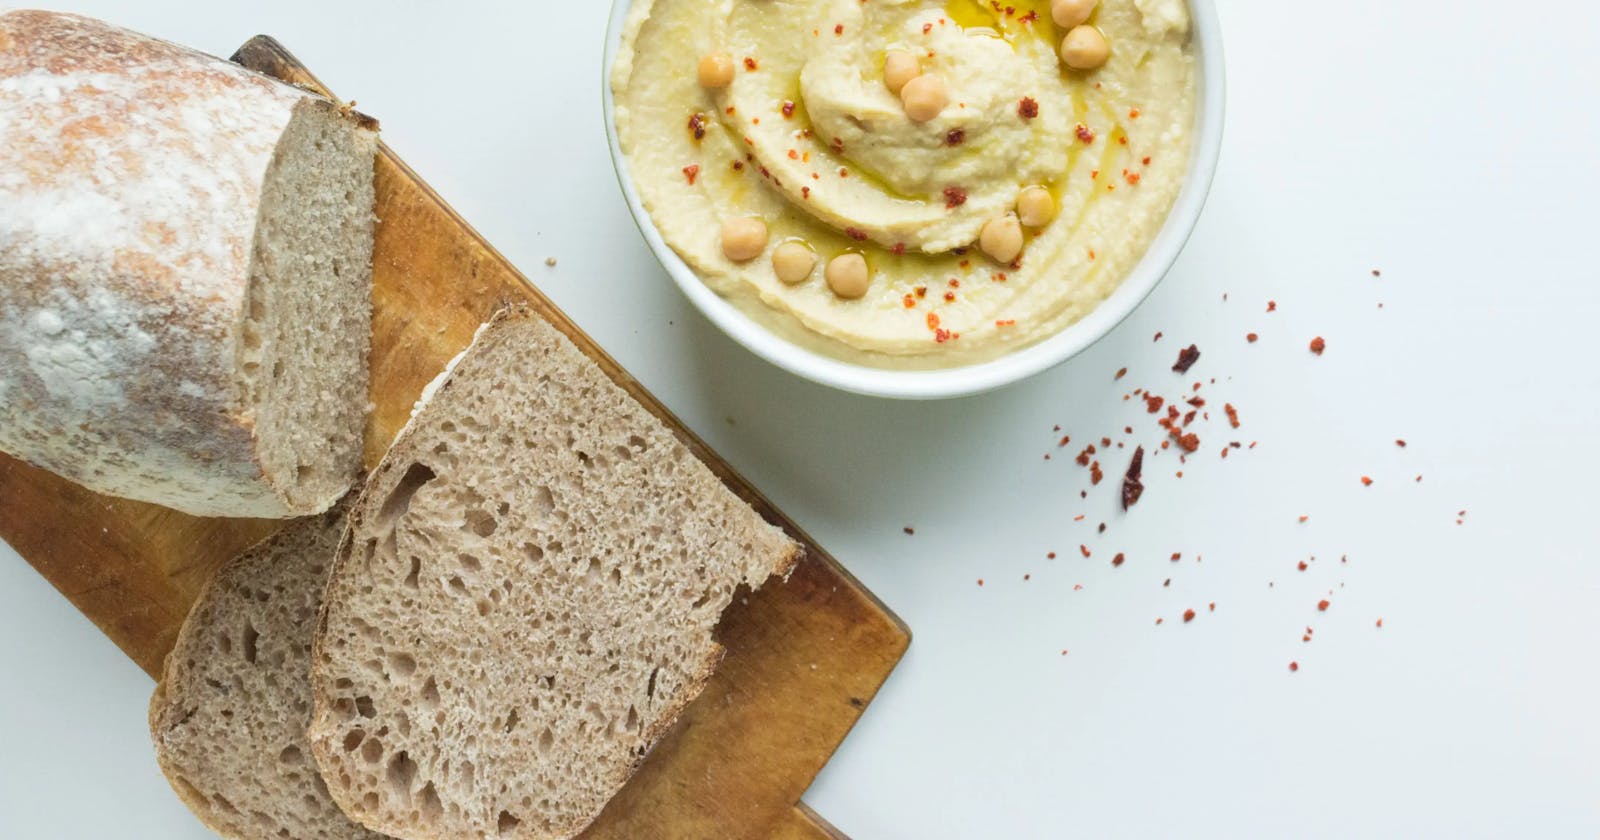 Tangy Chickpea Salad Spread